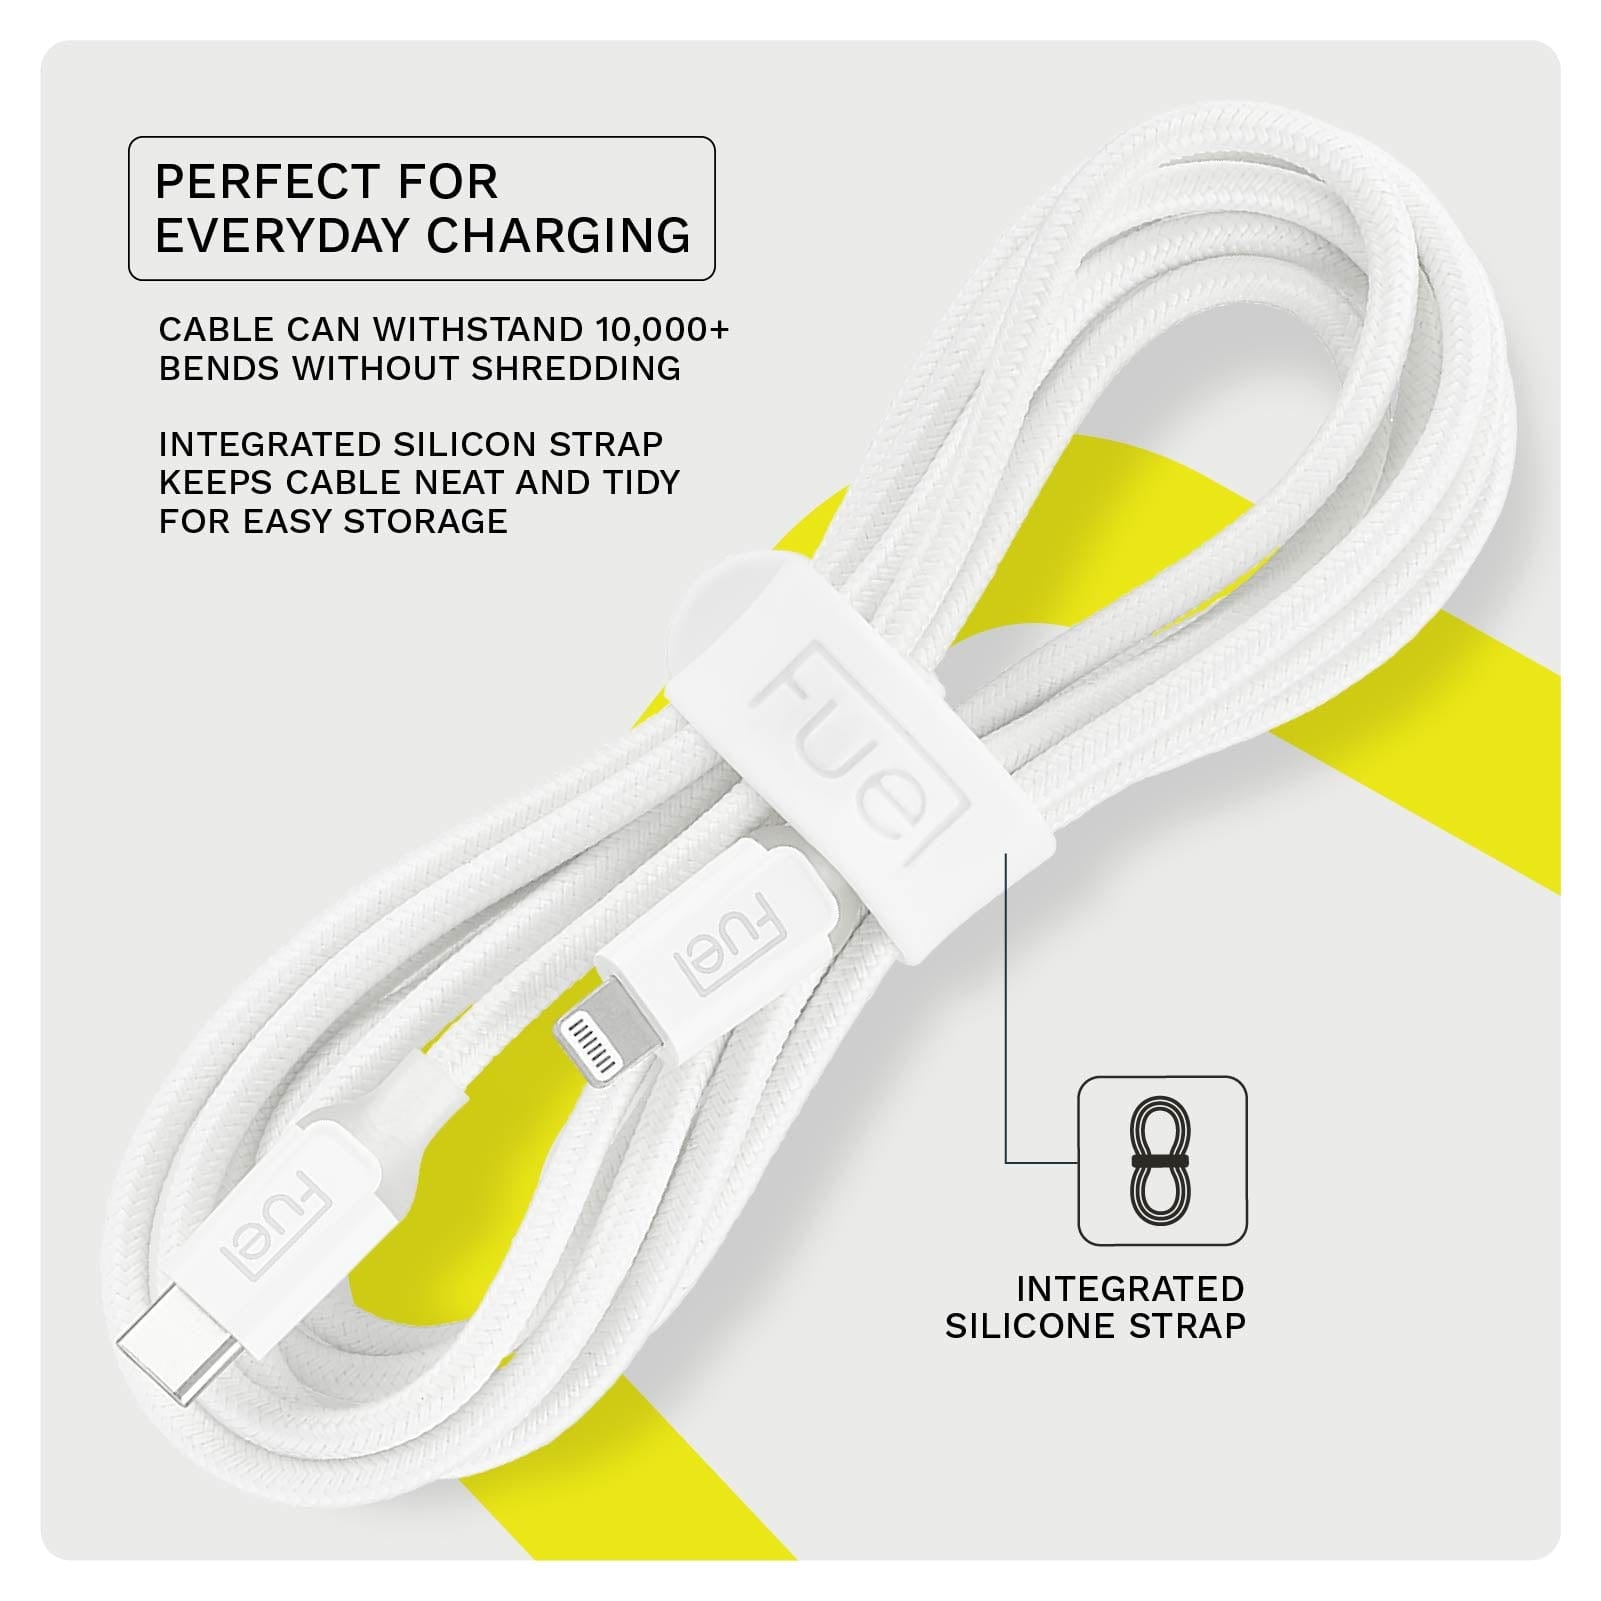 PERFECT FOR EVERYDAY CHARGING. CABLE CAN WITHSTAND 10,000+ BENDS WITHOUT SHREDDING. INTEGRATED SLICON STRAP KEEPS CABLE NEAT AND TIDY FOR EASY STORAGE.